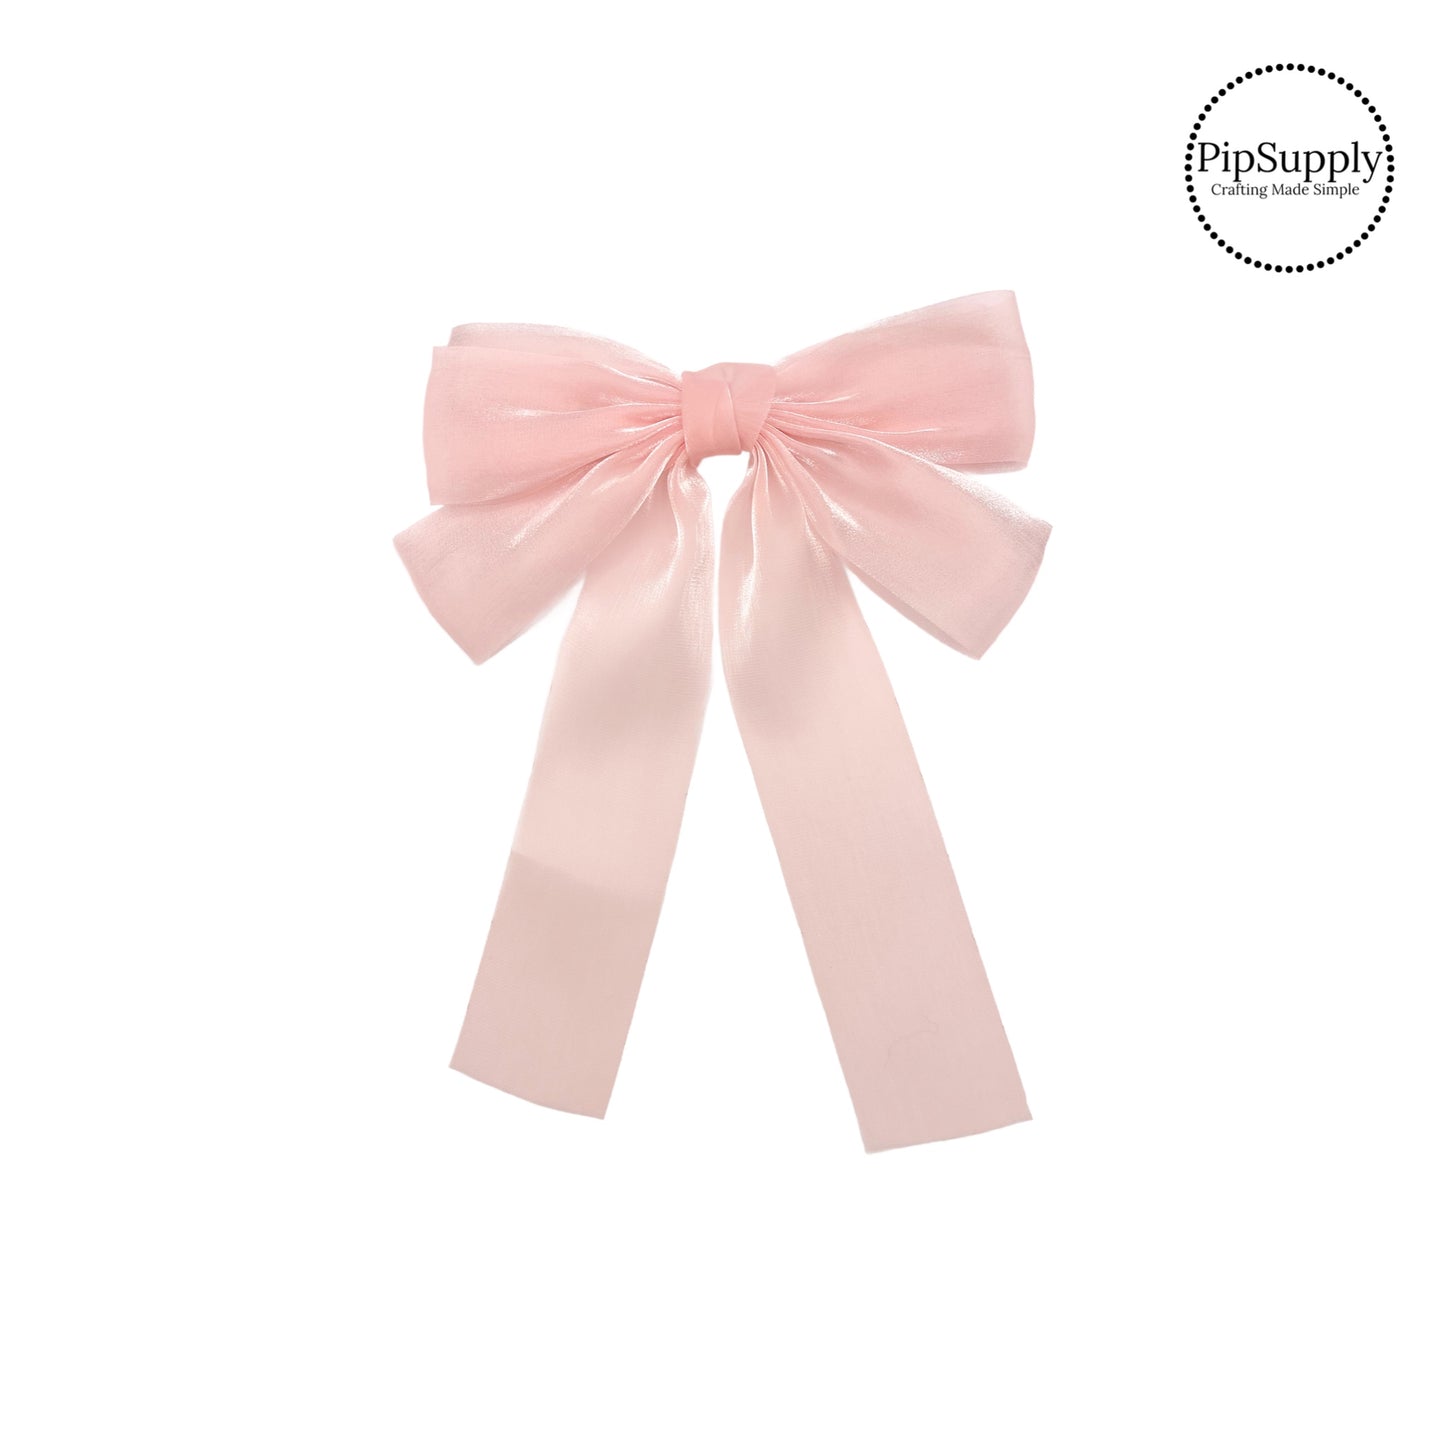 Theses shimmer organza flowy large hair bows are ready to package and resell to your customers no sewing or measuring necessary! These come pre-tied with an attached barrette clip. The delicate bow is perfect for all hair styles for kids and adults.